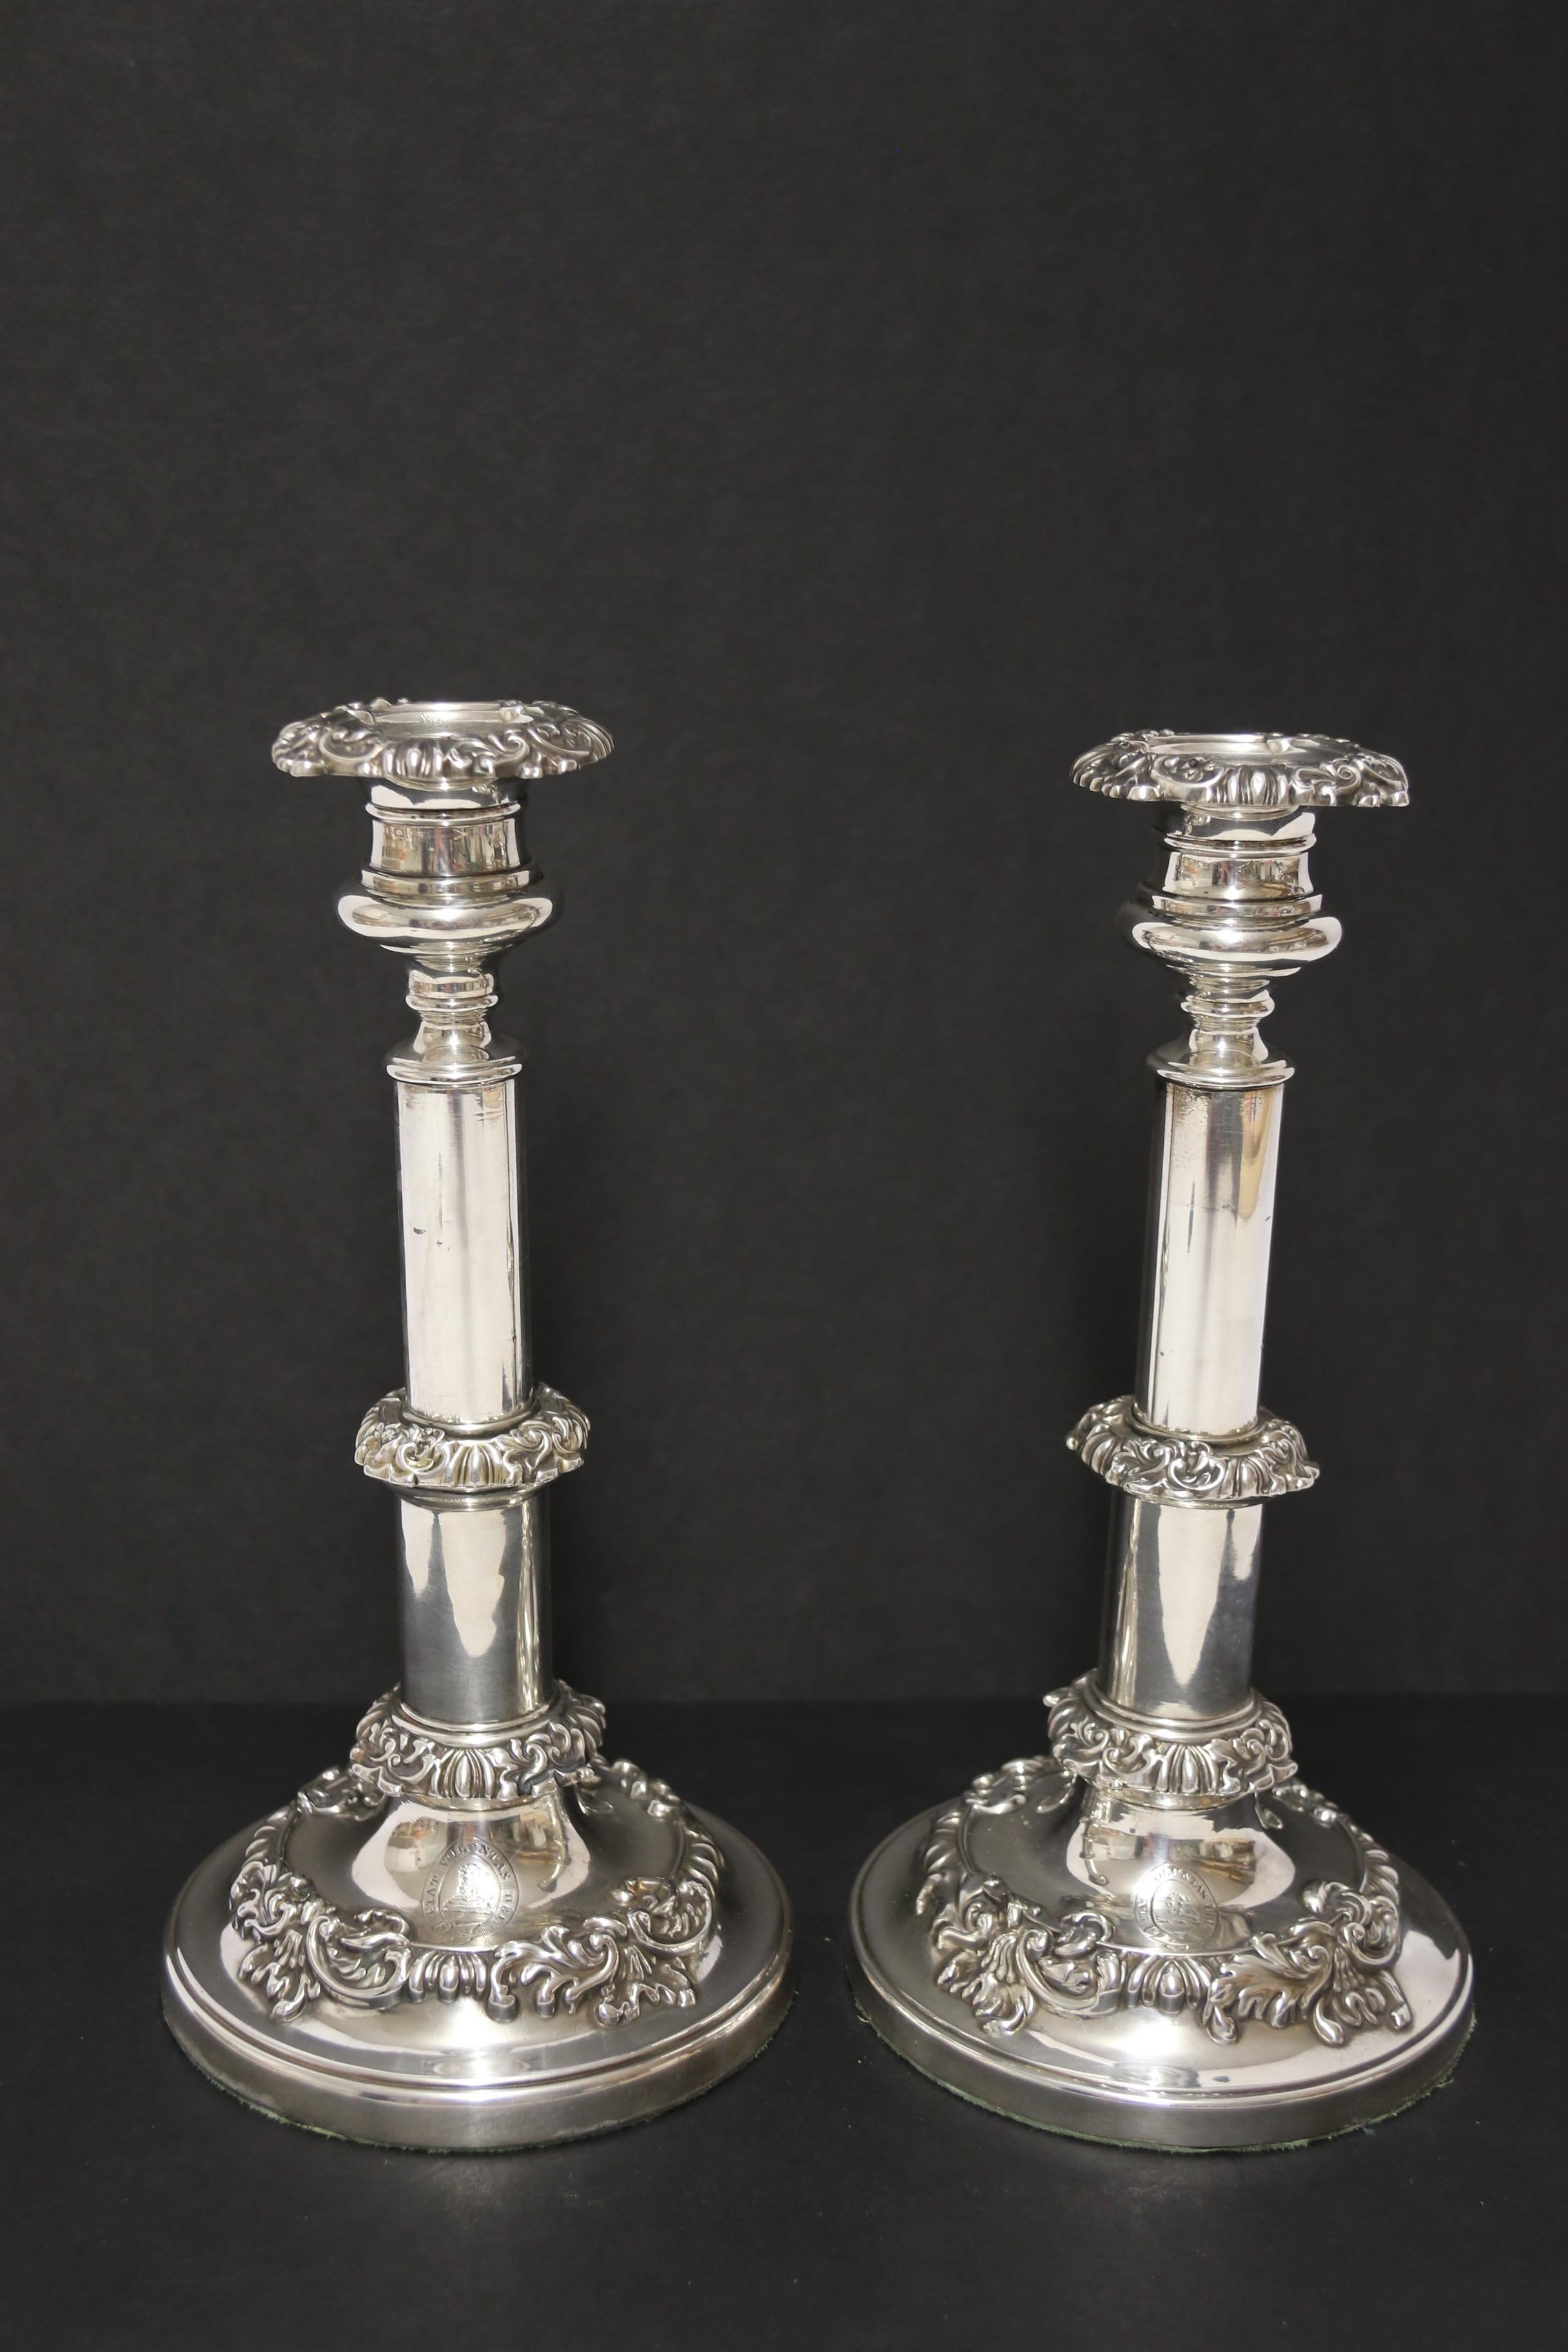 This superb pair of English hallmarked silver telescopic candlesticks were hallmarked in Sheffield one 1815 – 16 and the other 1816 – 17.  Undoubtedly both were made in 1816 by silversmiths John and Thomas Settle 1814 – 1825.  They were noted as